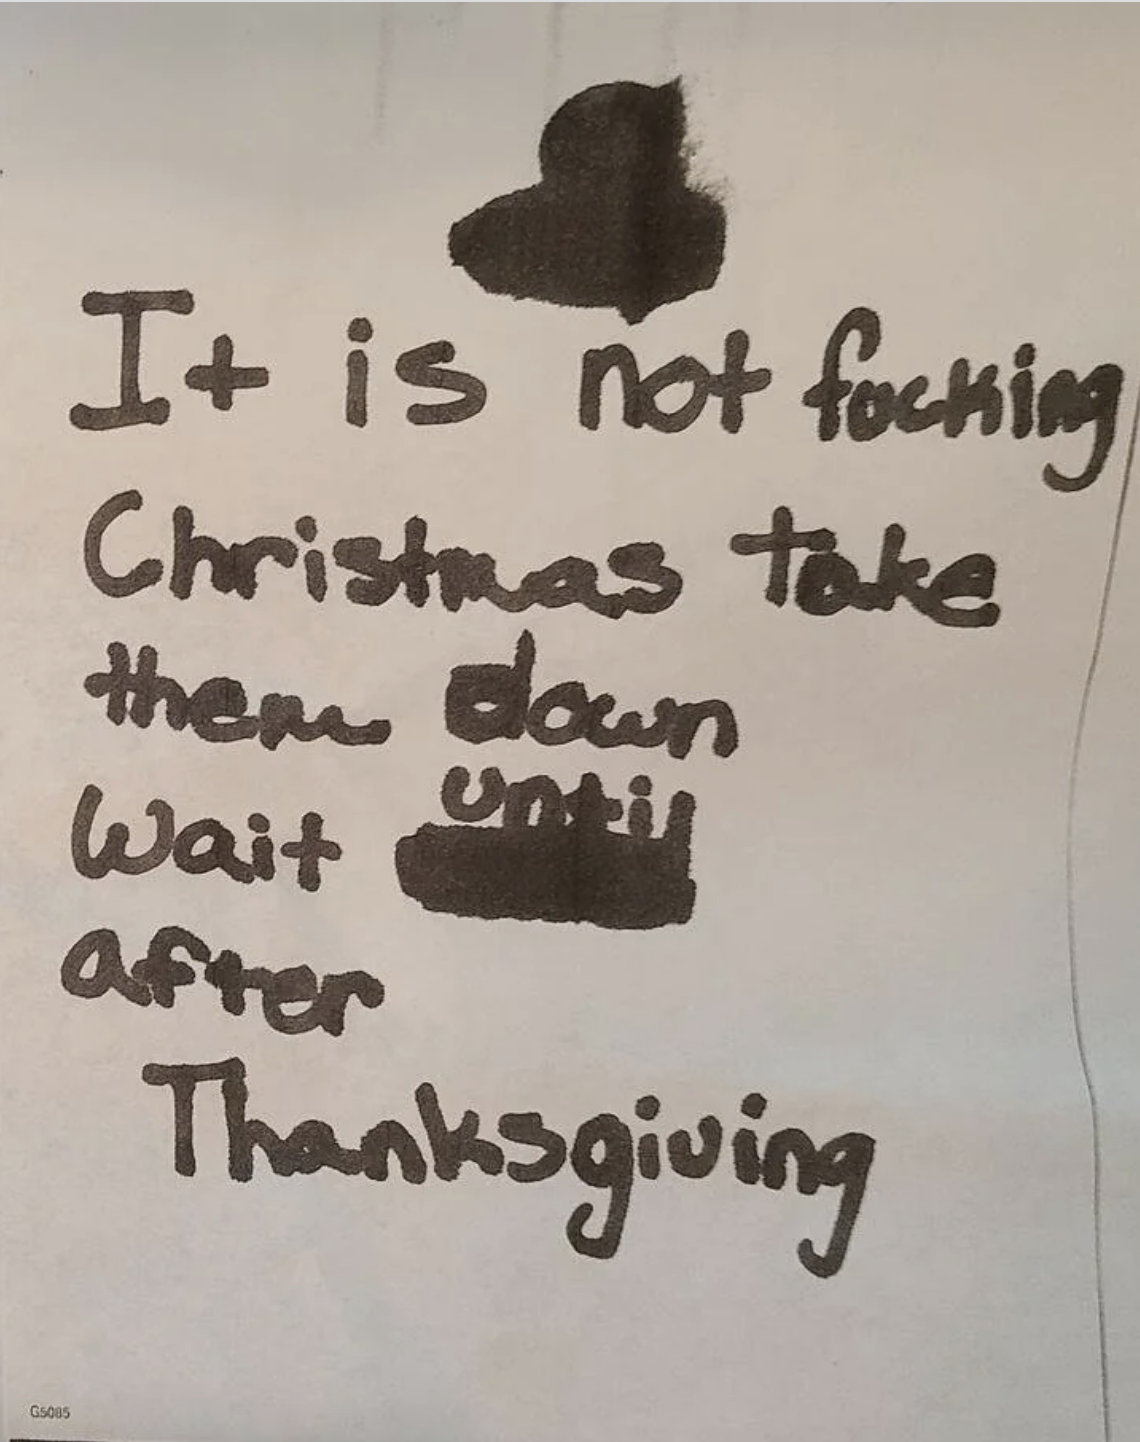 A second note says &quot;It is not fucking Christmas, take them down and wait until after Thanksgiving&quot;